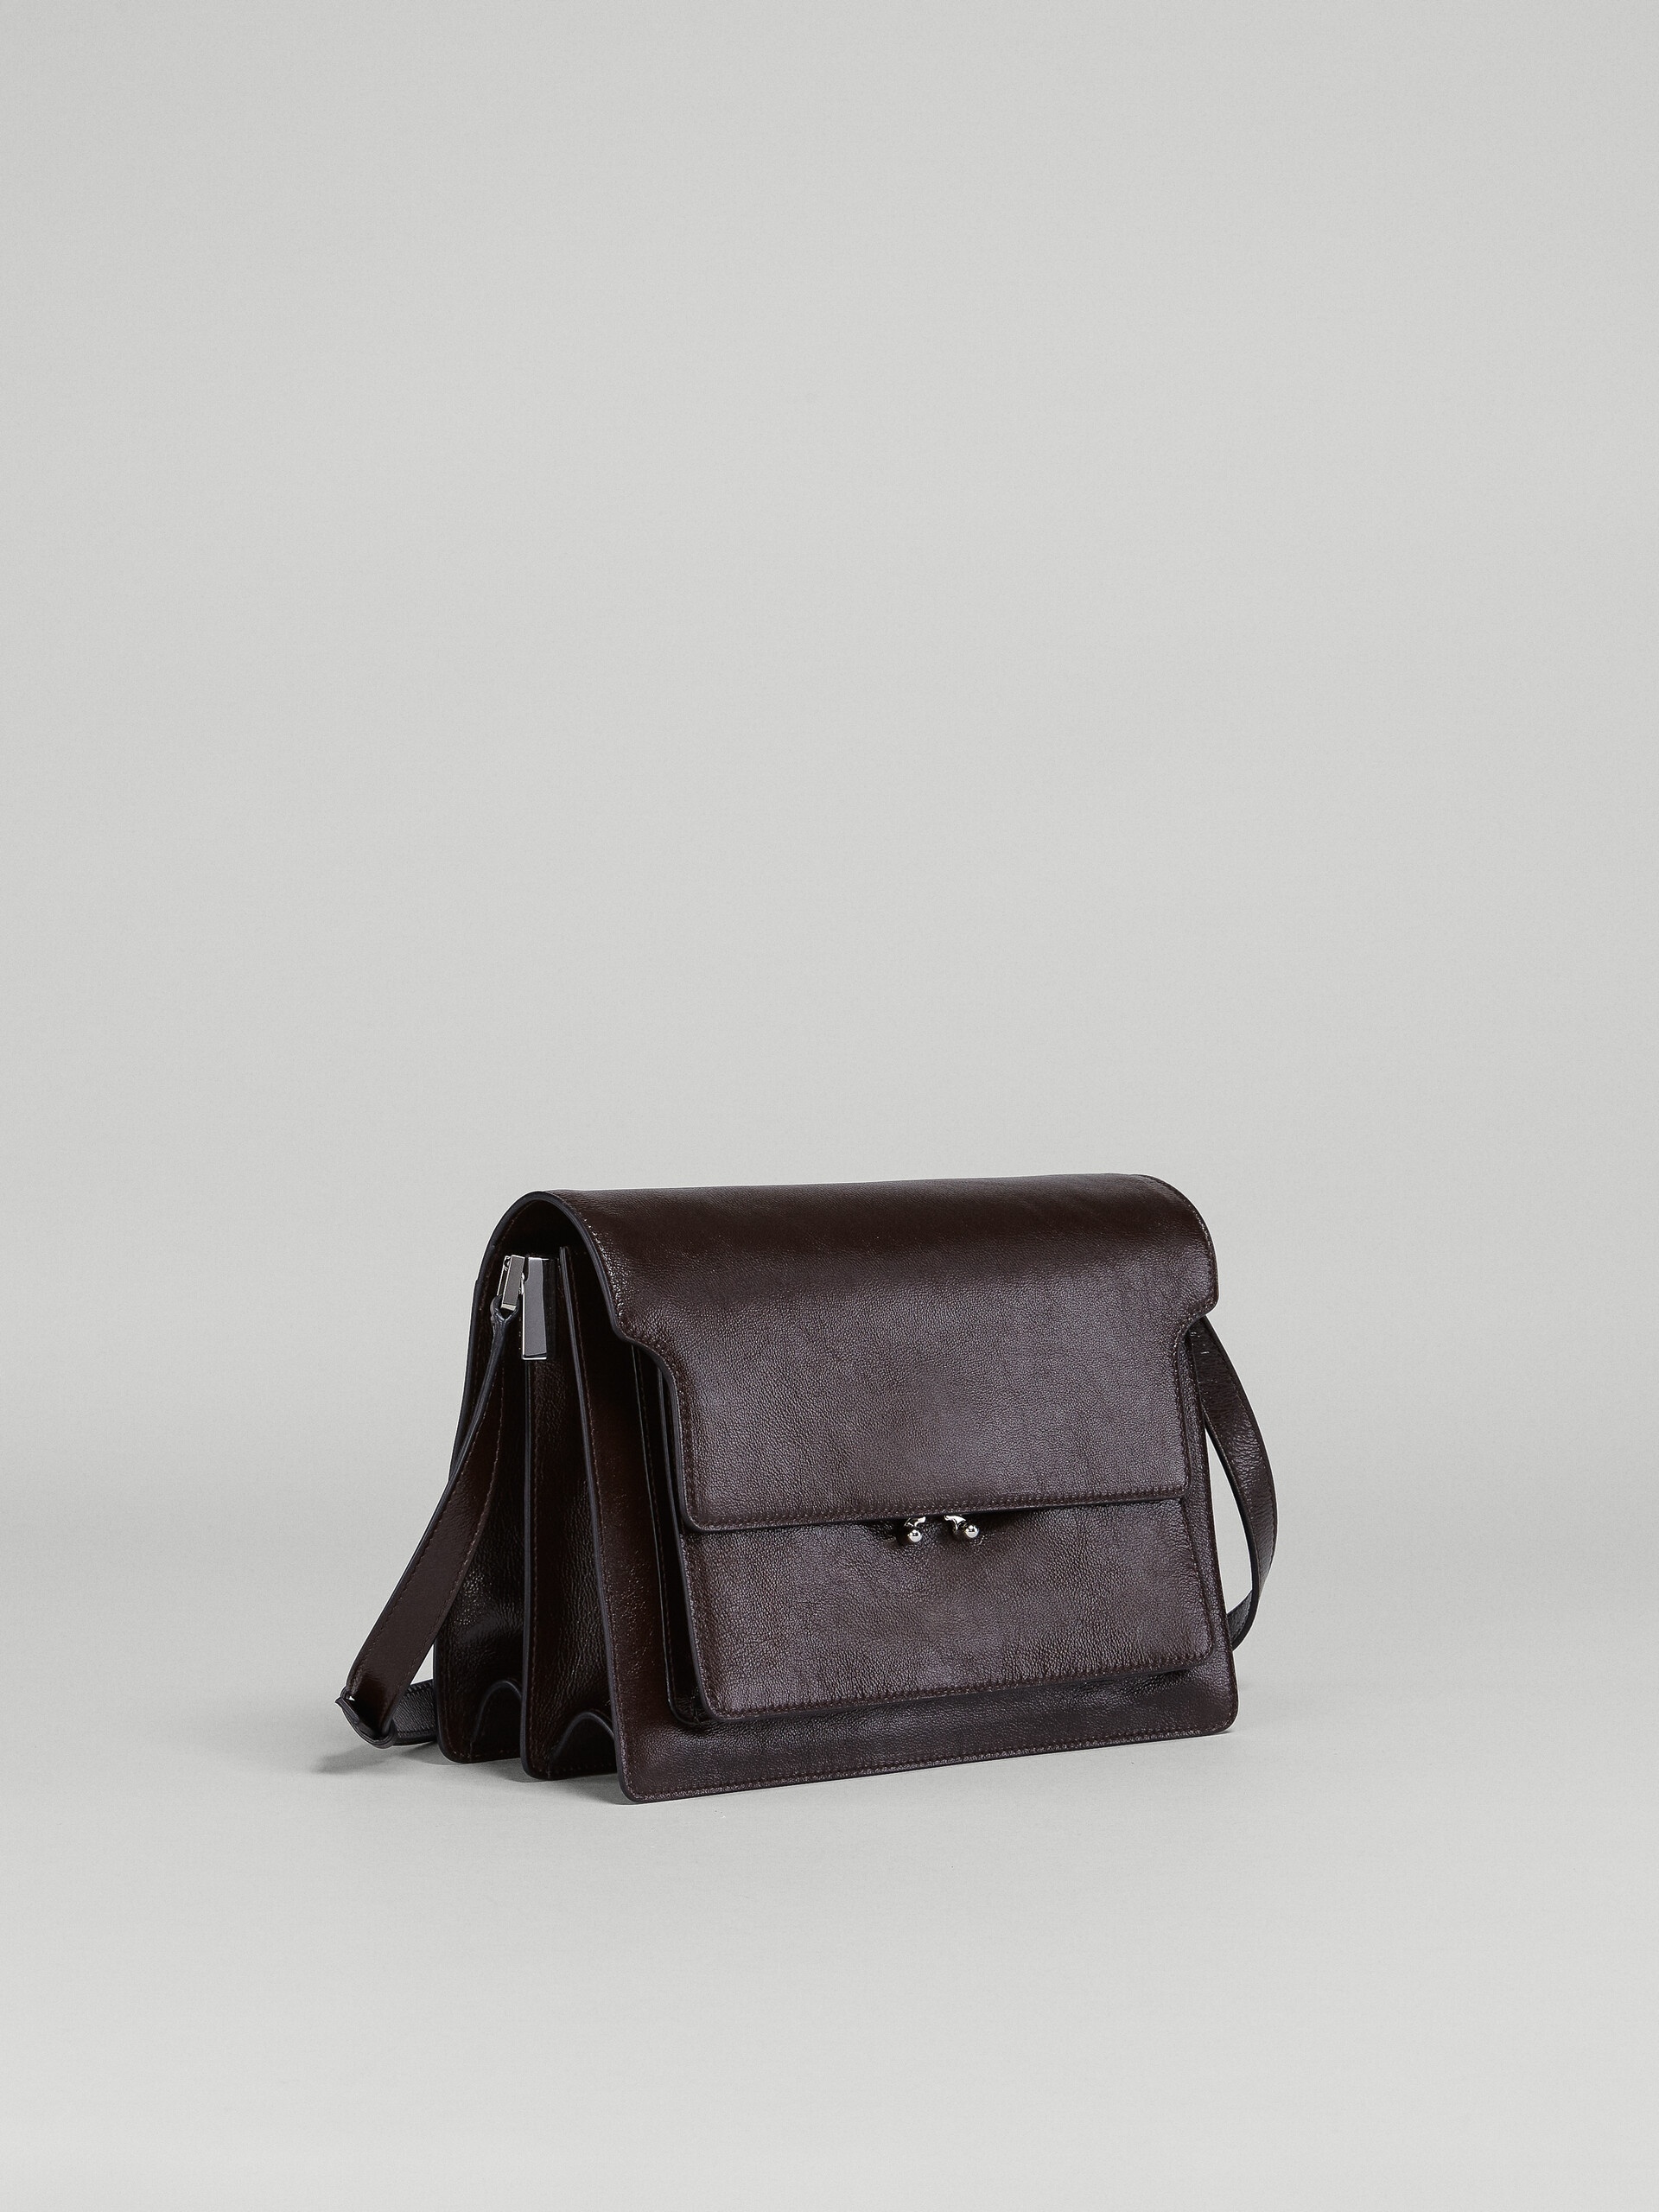 TRUNK SOFT LARGE BAG IN BROWN LEATHER - 5